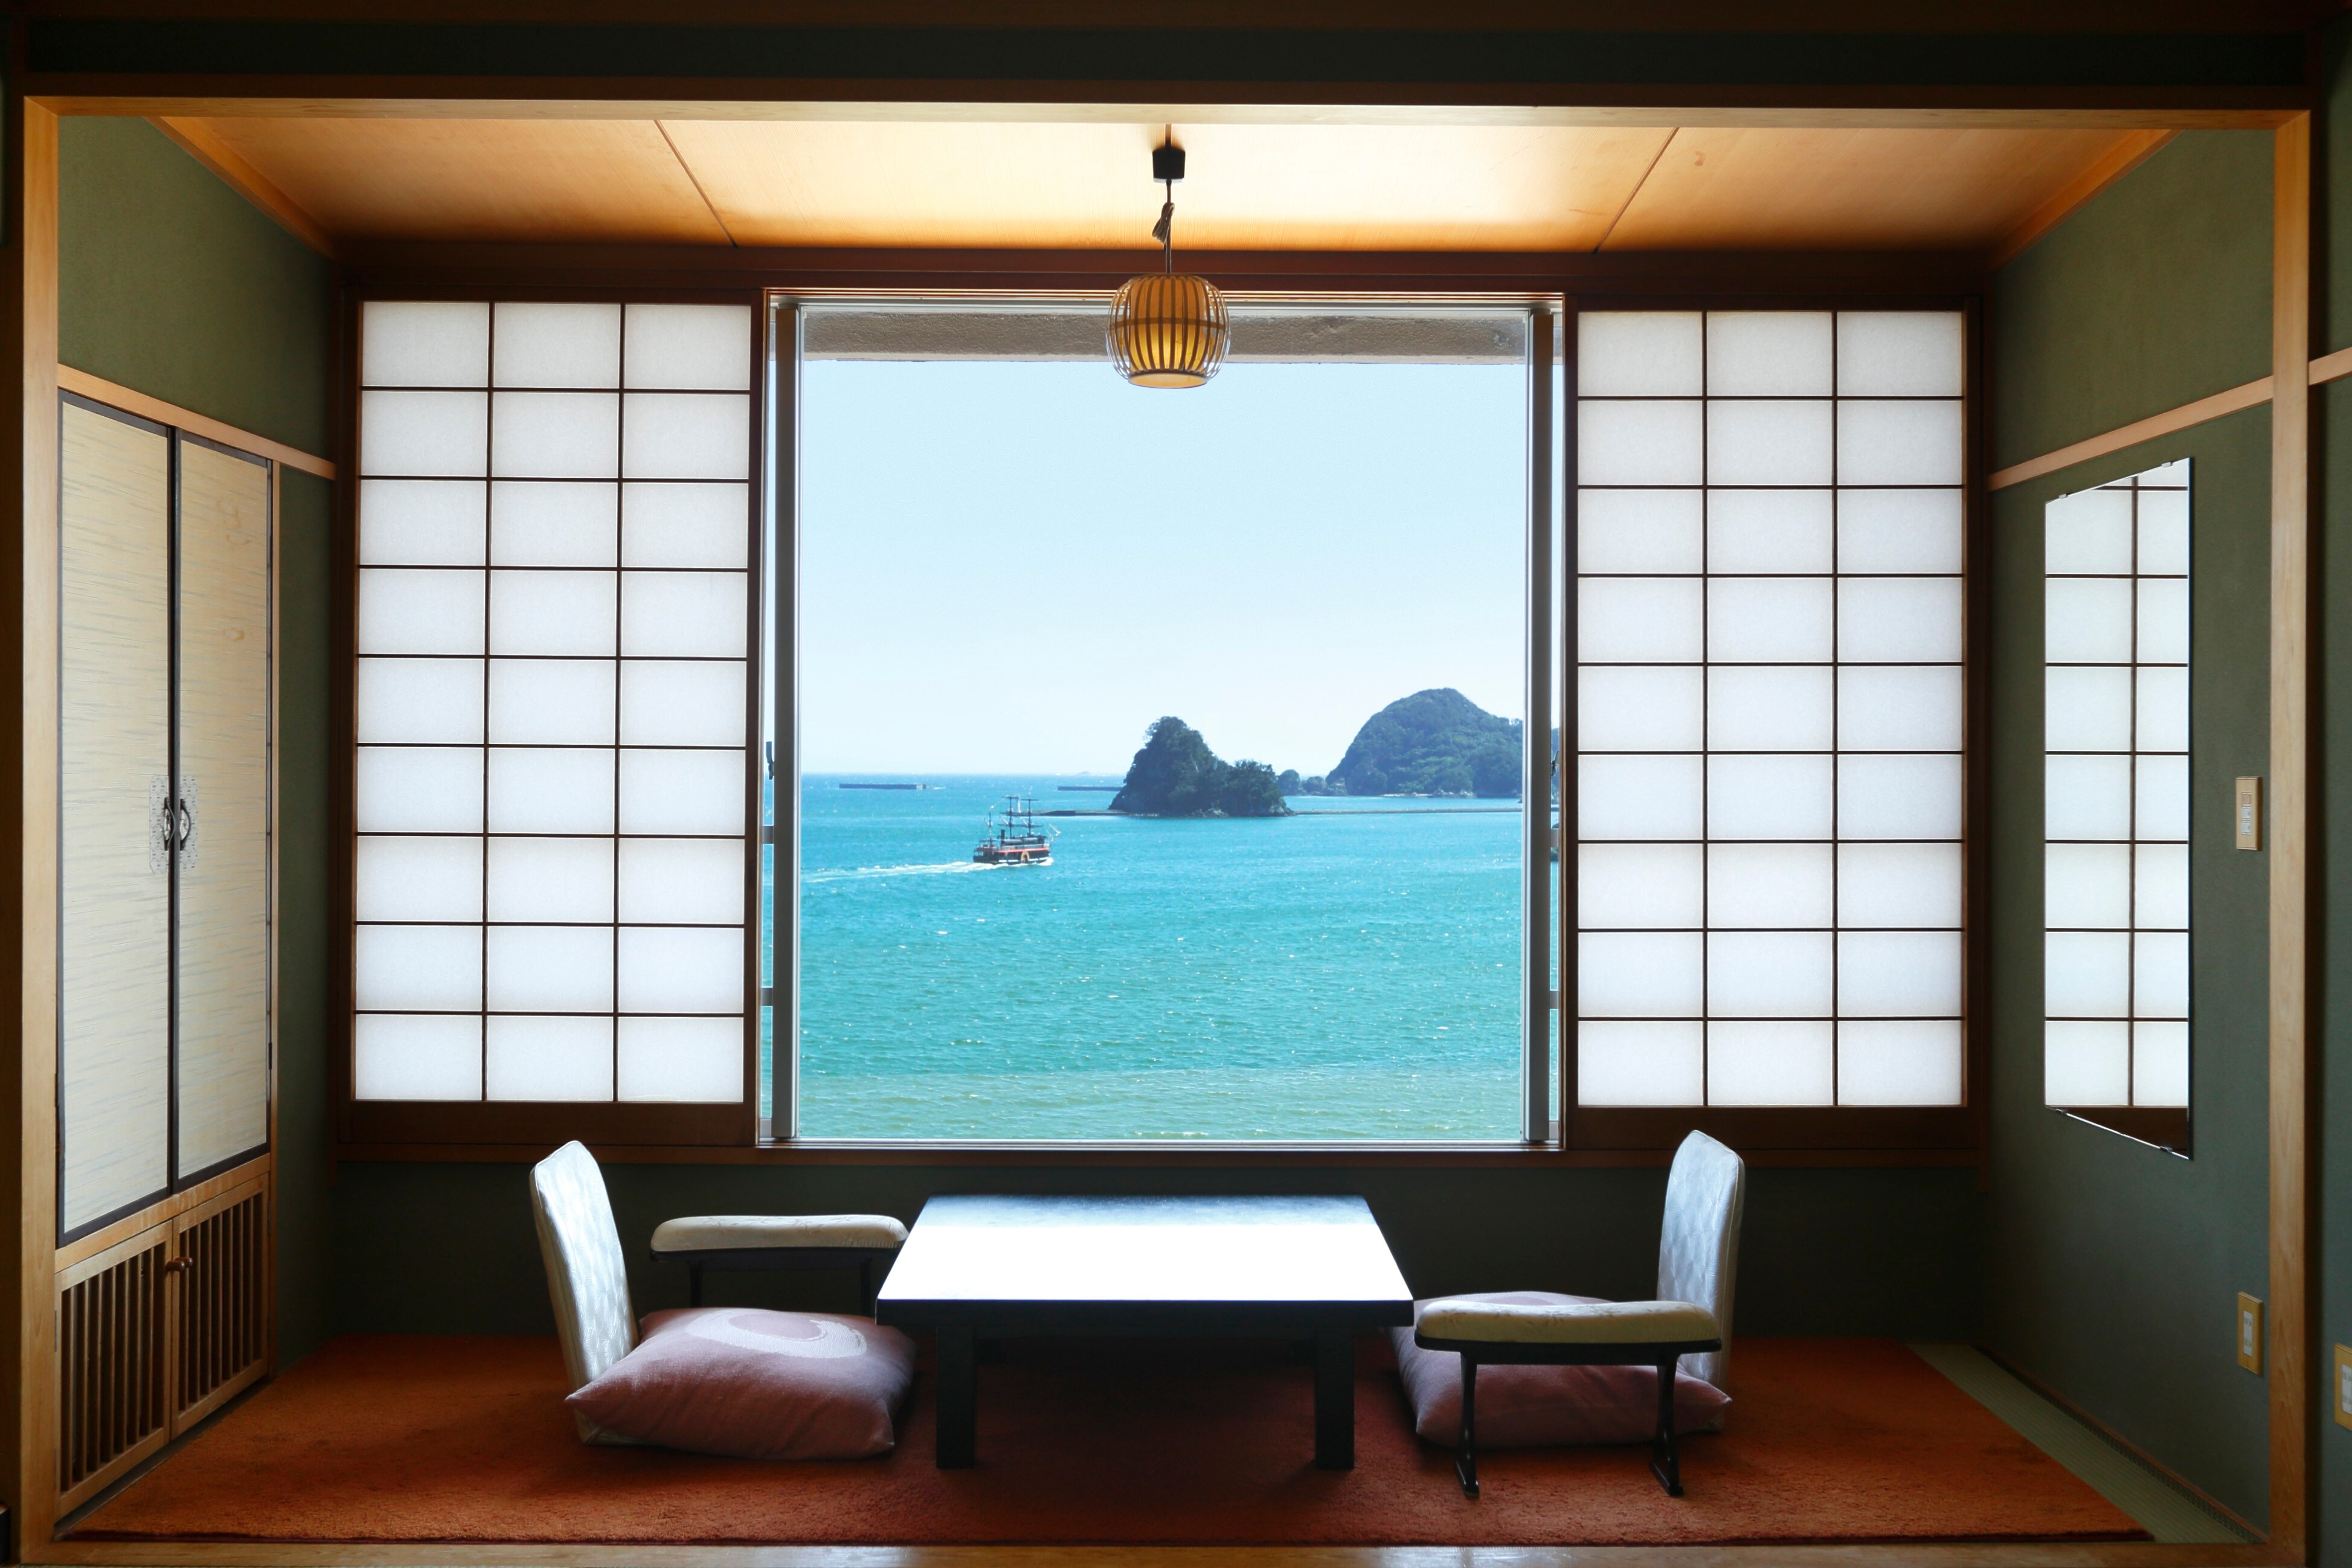 All guest rooms have ocean views ♪